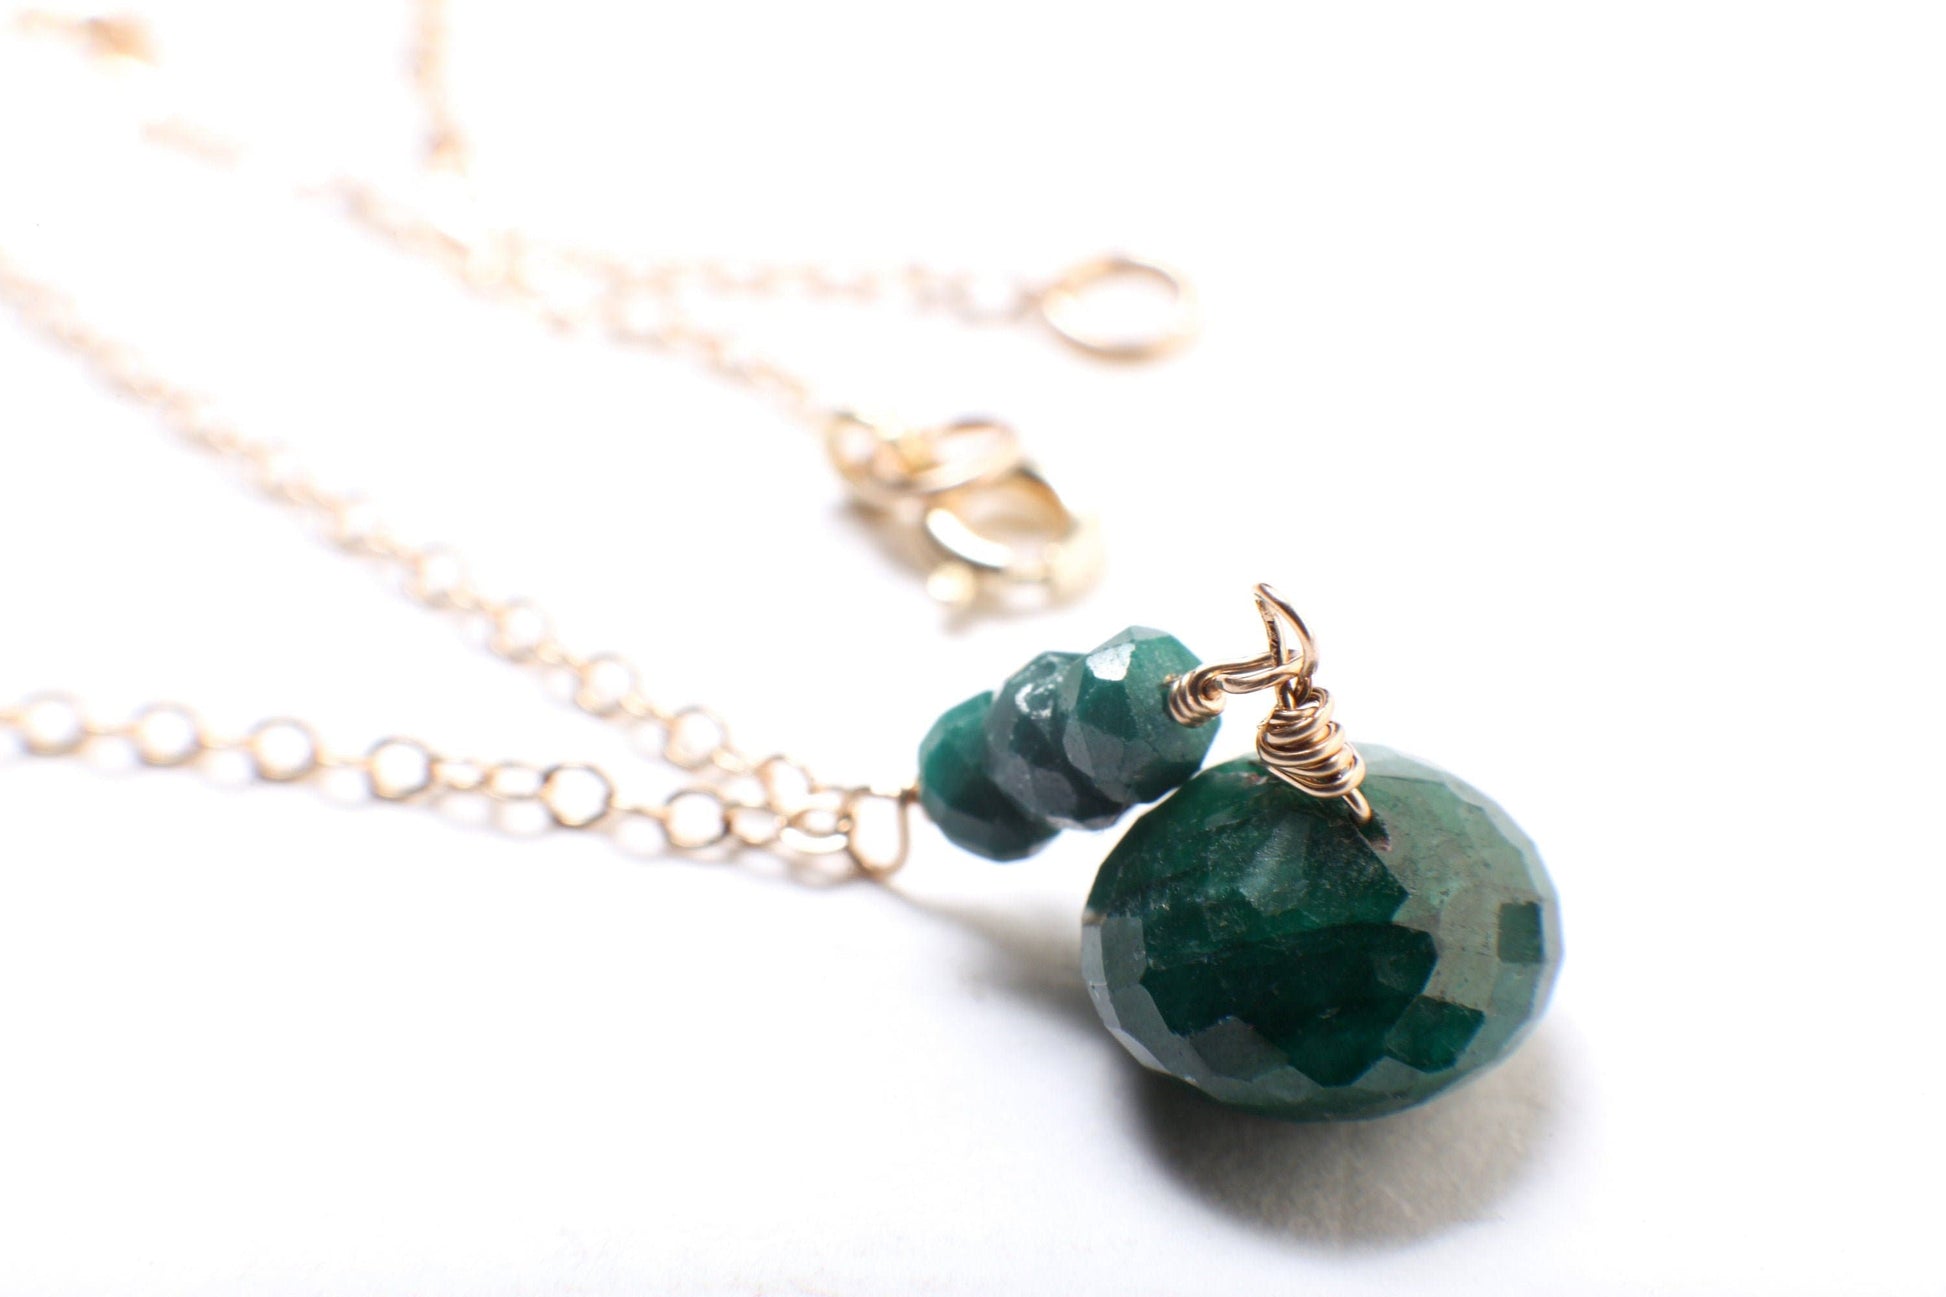 Genuine Emerald Onion Drop Briolette Wire Wrapped Faceted 8x11mm Teardrop Charm, 4mm Emerald Rondelle in 14K Gold Filled Chain and Clasp